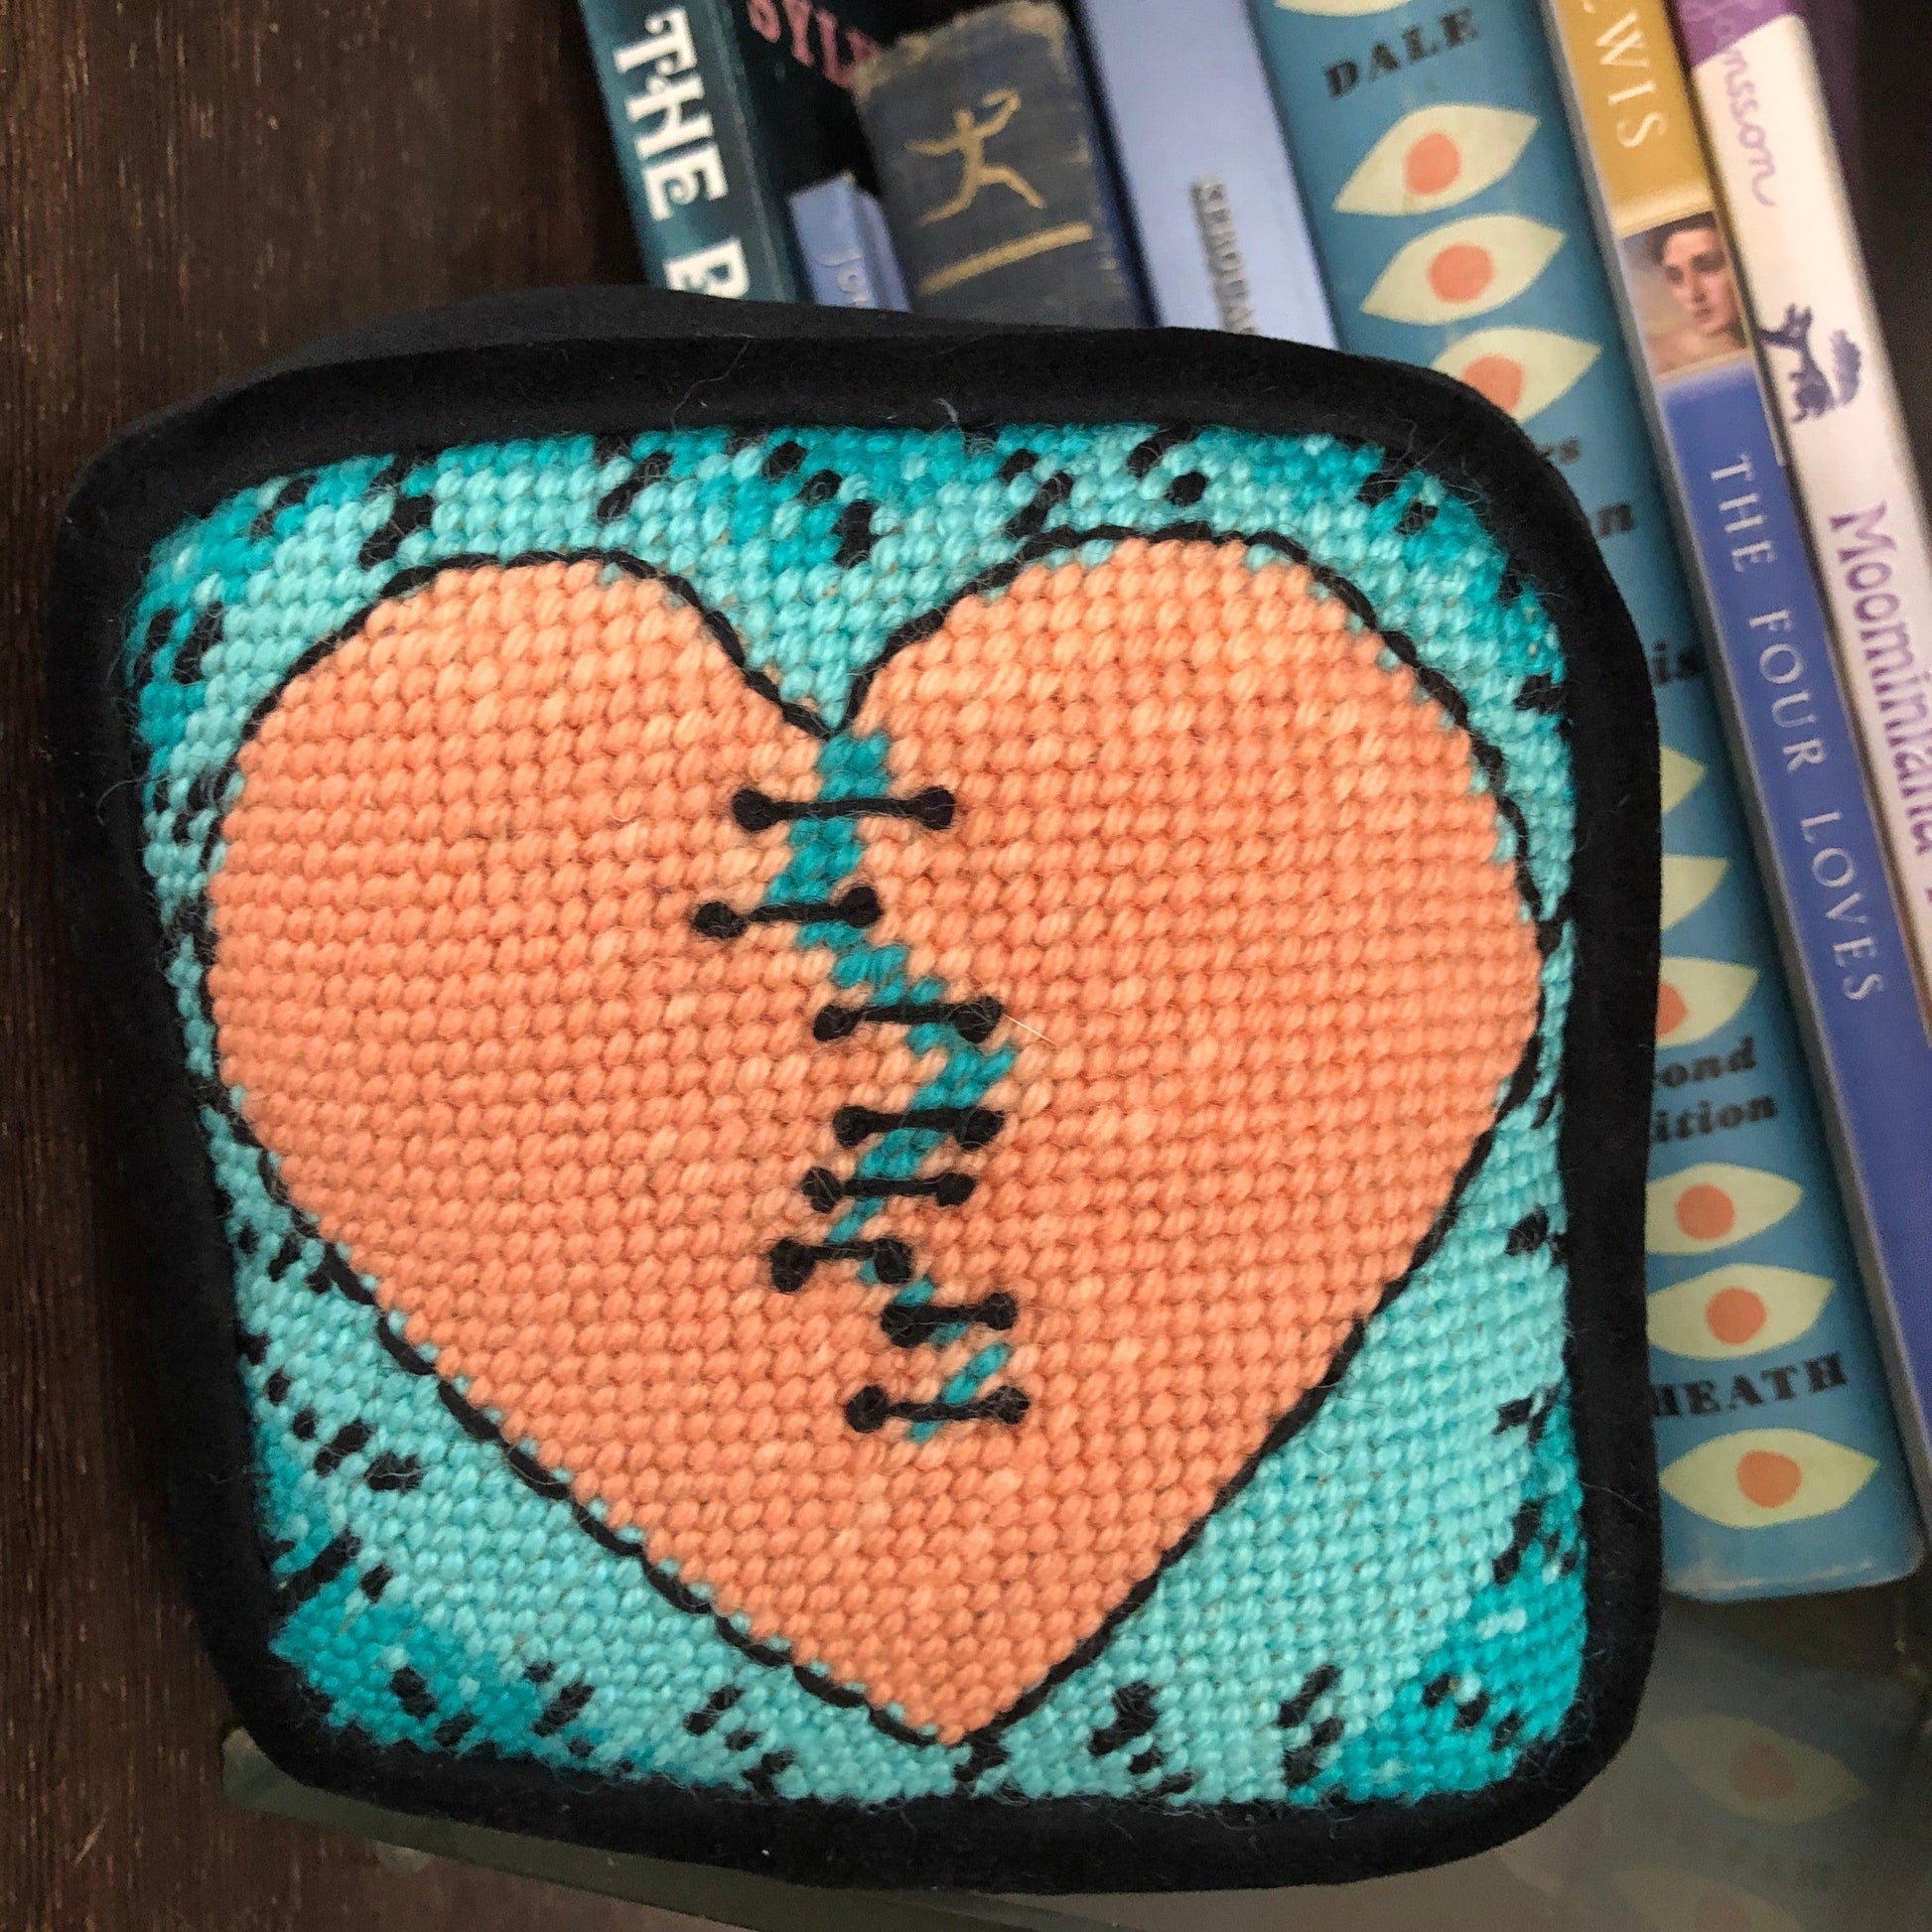 Variegated orange broken-heart pillow with turquoise background, book shelf